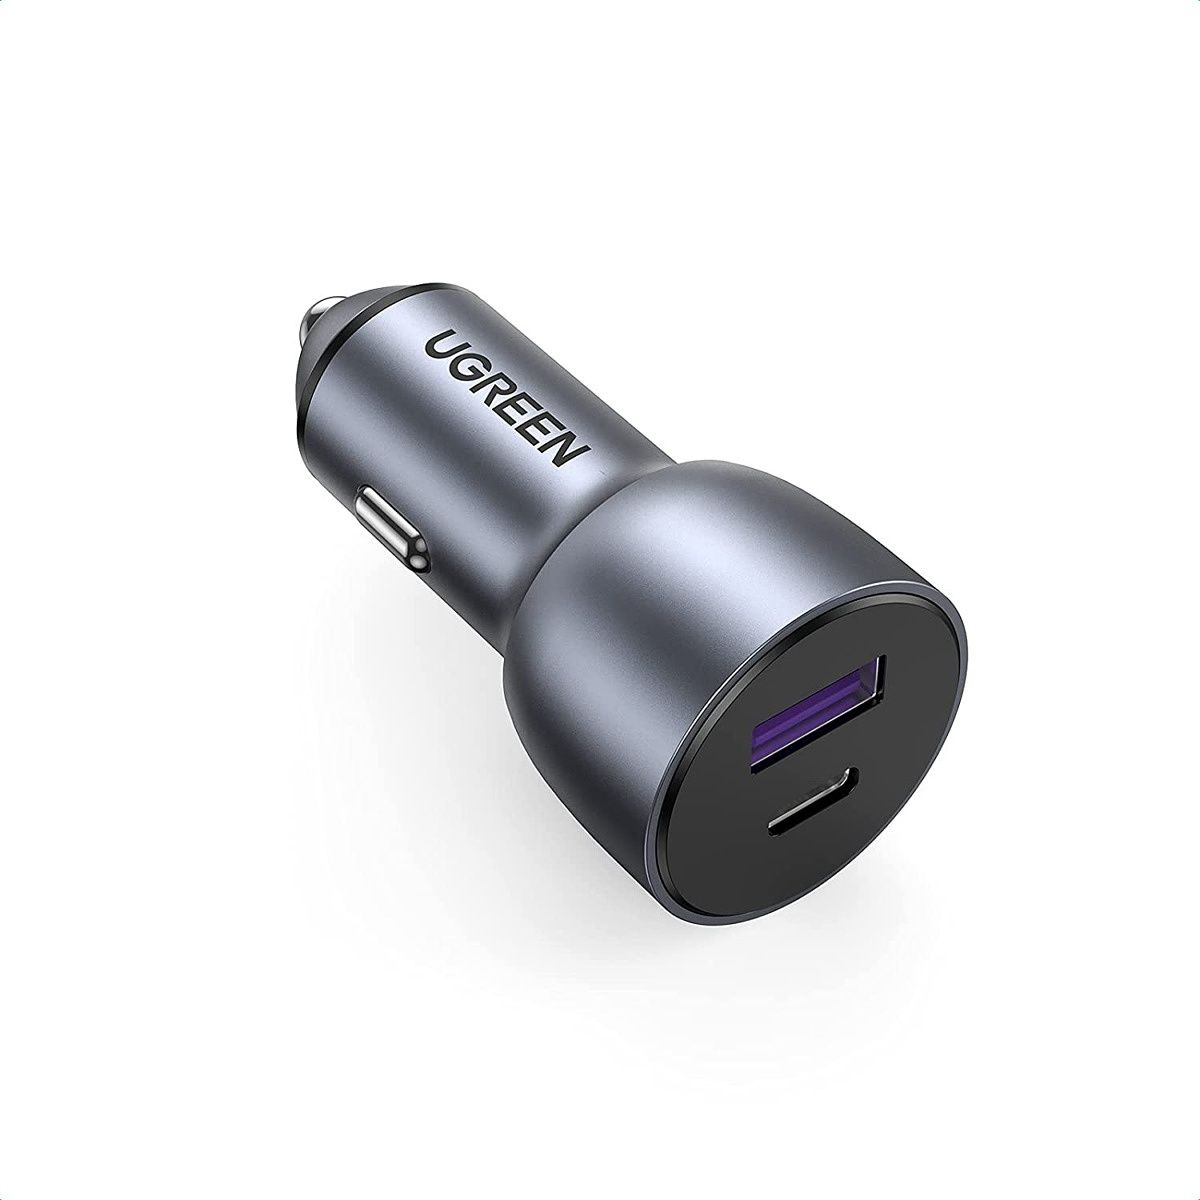 Apart from its excellent wall charger, Ugreen also sells this amazing car charger that can fast charge your Galaxy Z Flip 3. It comes with two ports — one Type-C and one Type-A — so you can simultaneously charge two devices in the car.